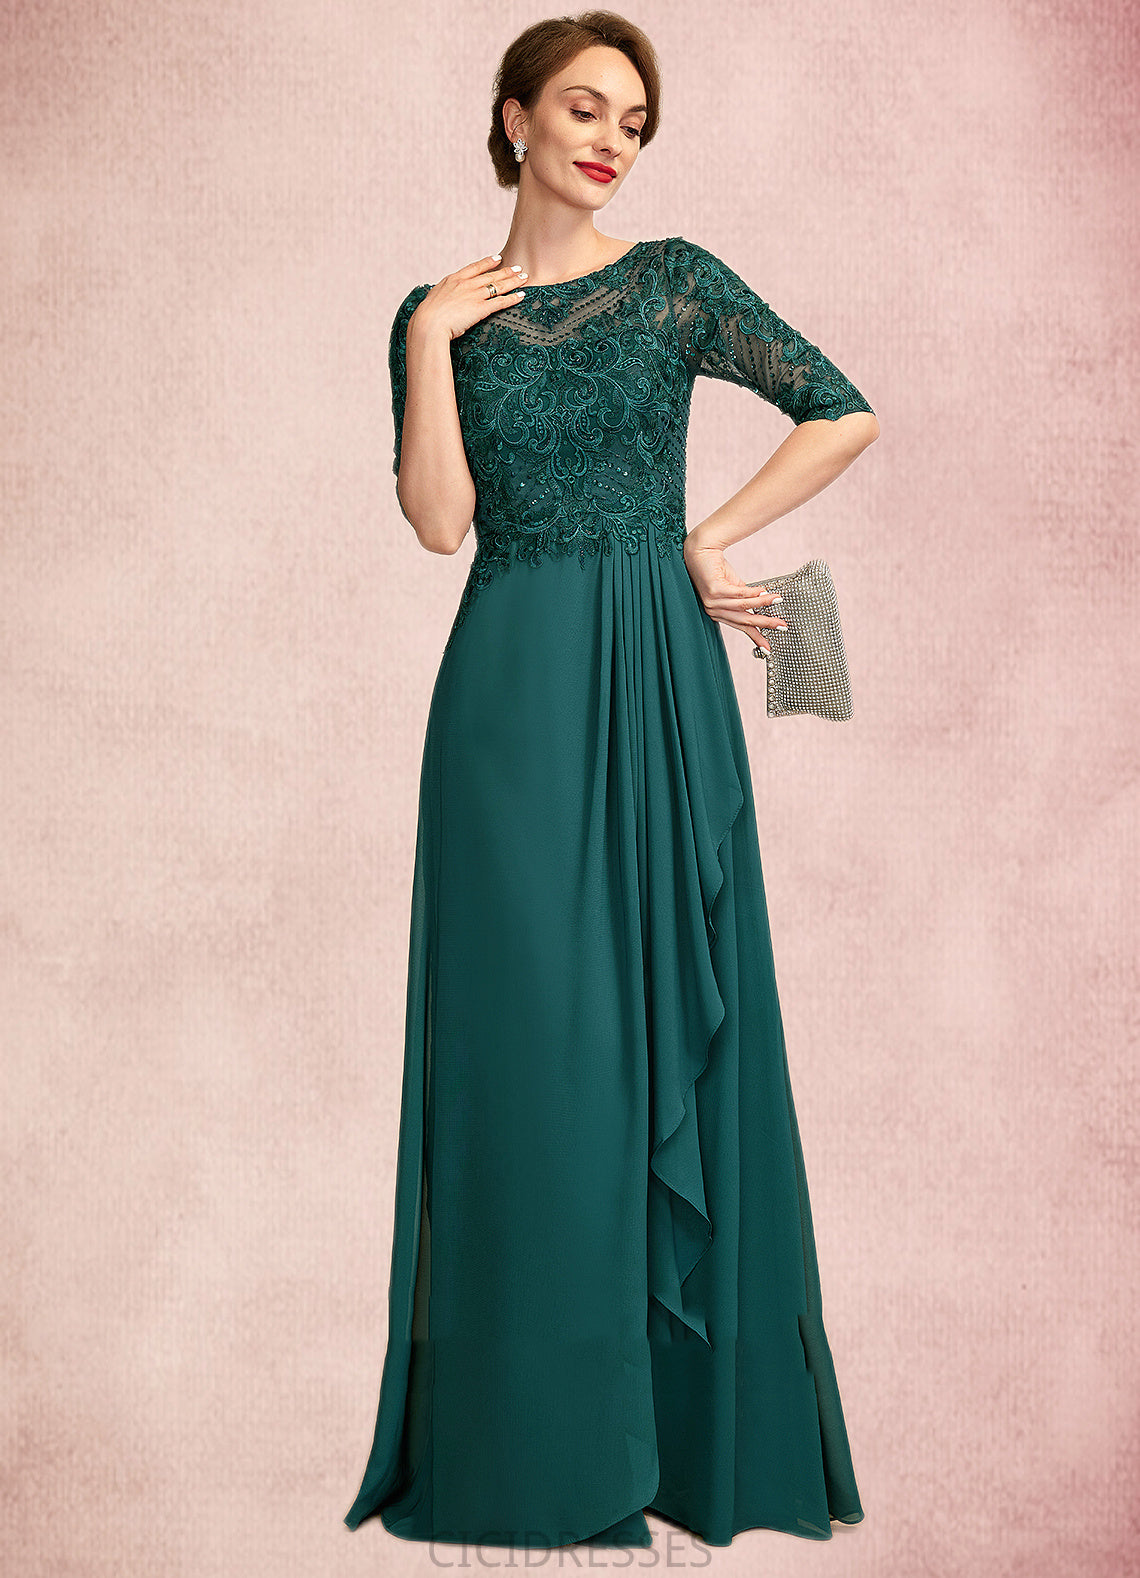 Hope A-Line Scoop Neck Floor-Length Chiffon Lace Mother of the Bride Dress With Beading Sequins Cascading Ruffles CIC8126P0015027